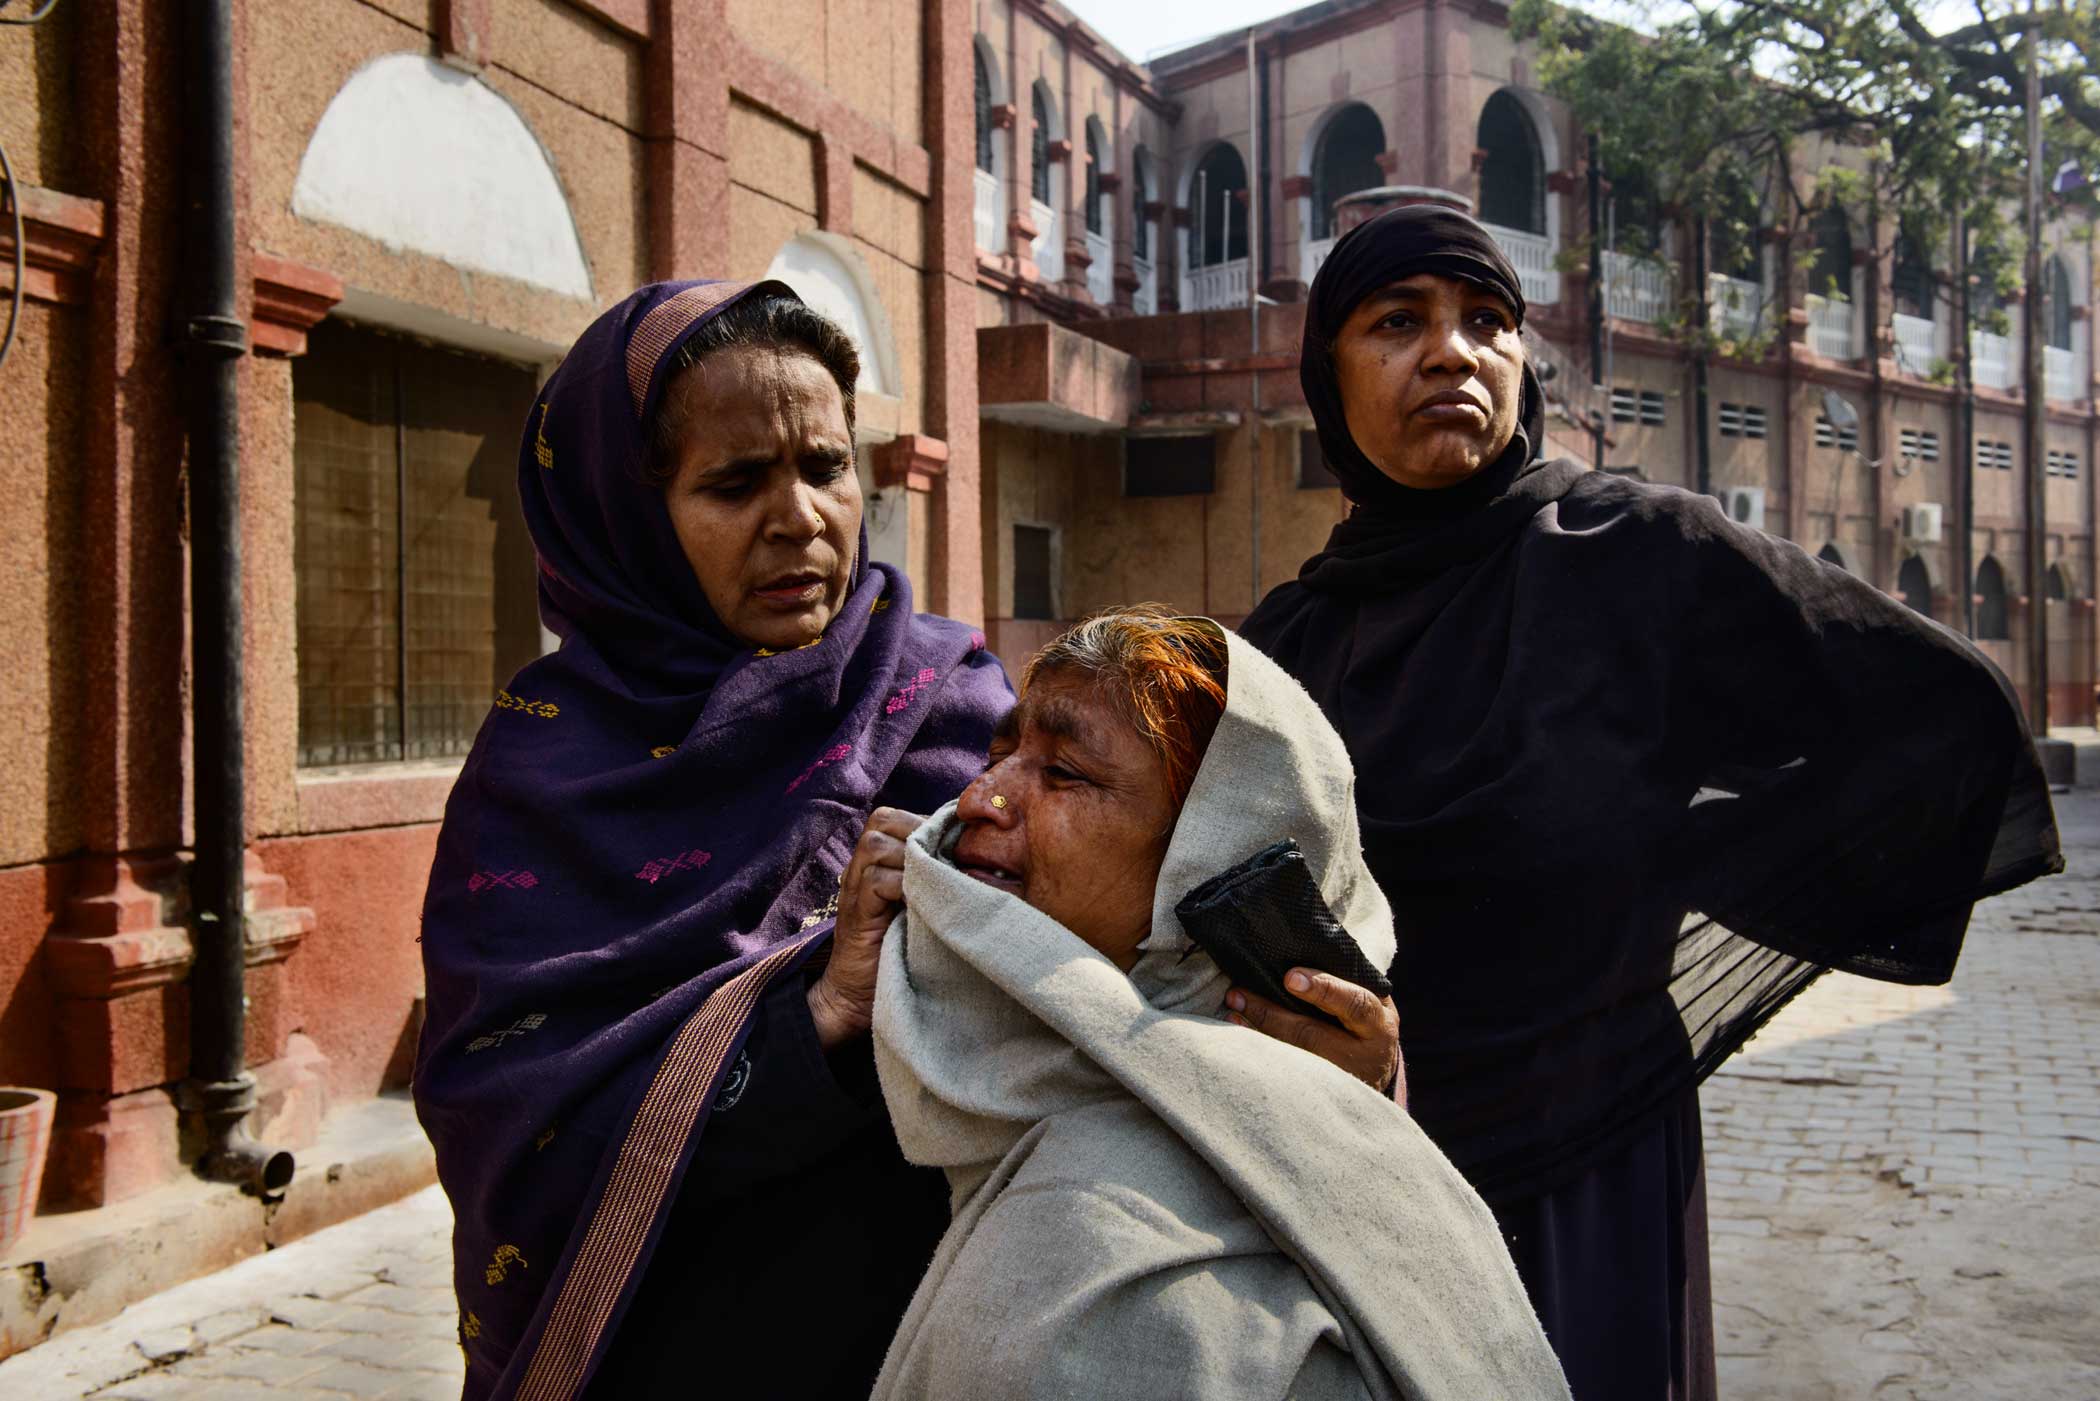 Relatives console Ruksana Bibi outside the Burn Ward of the Kabir Chaura hospital in Varanasi. Ruksana’s daughter Shama, 20, was attacked by three men who tried to rape her when she had gone out to fetch water. Shama resisted and the men were unable to rape her. They doused her in kerosene and lit her on fire. Shama died a week later. (Smita Sharma)